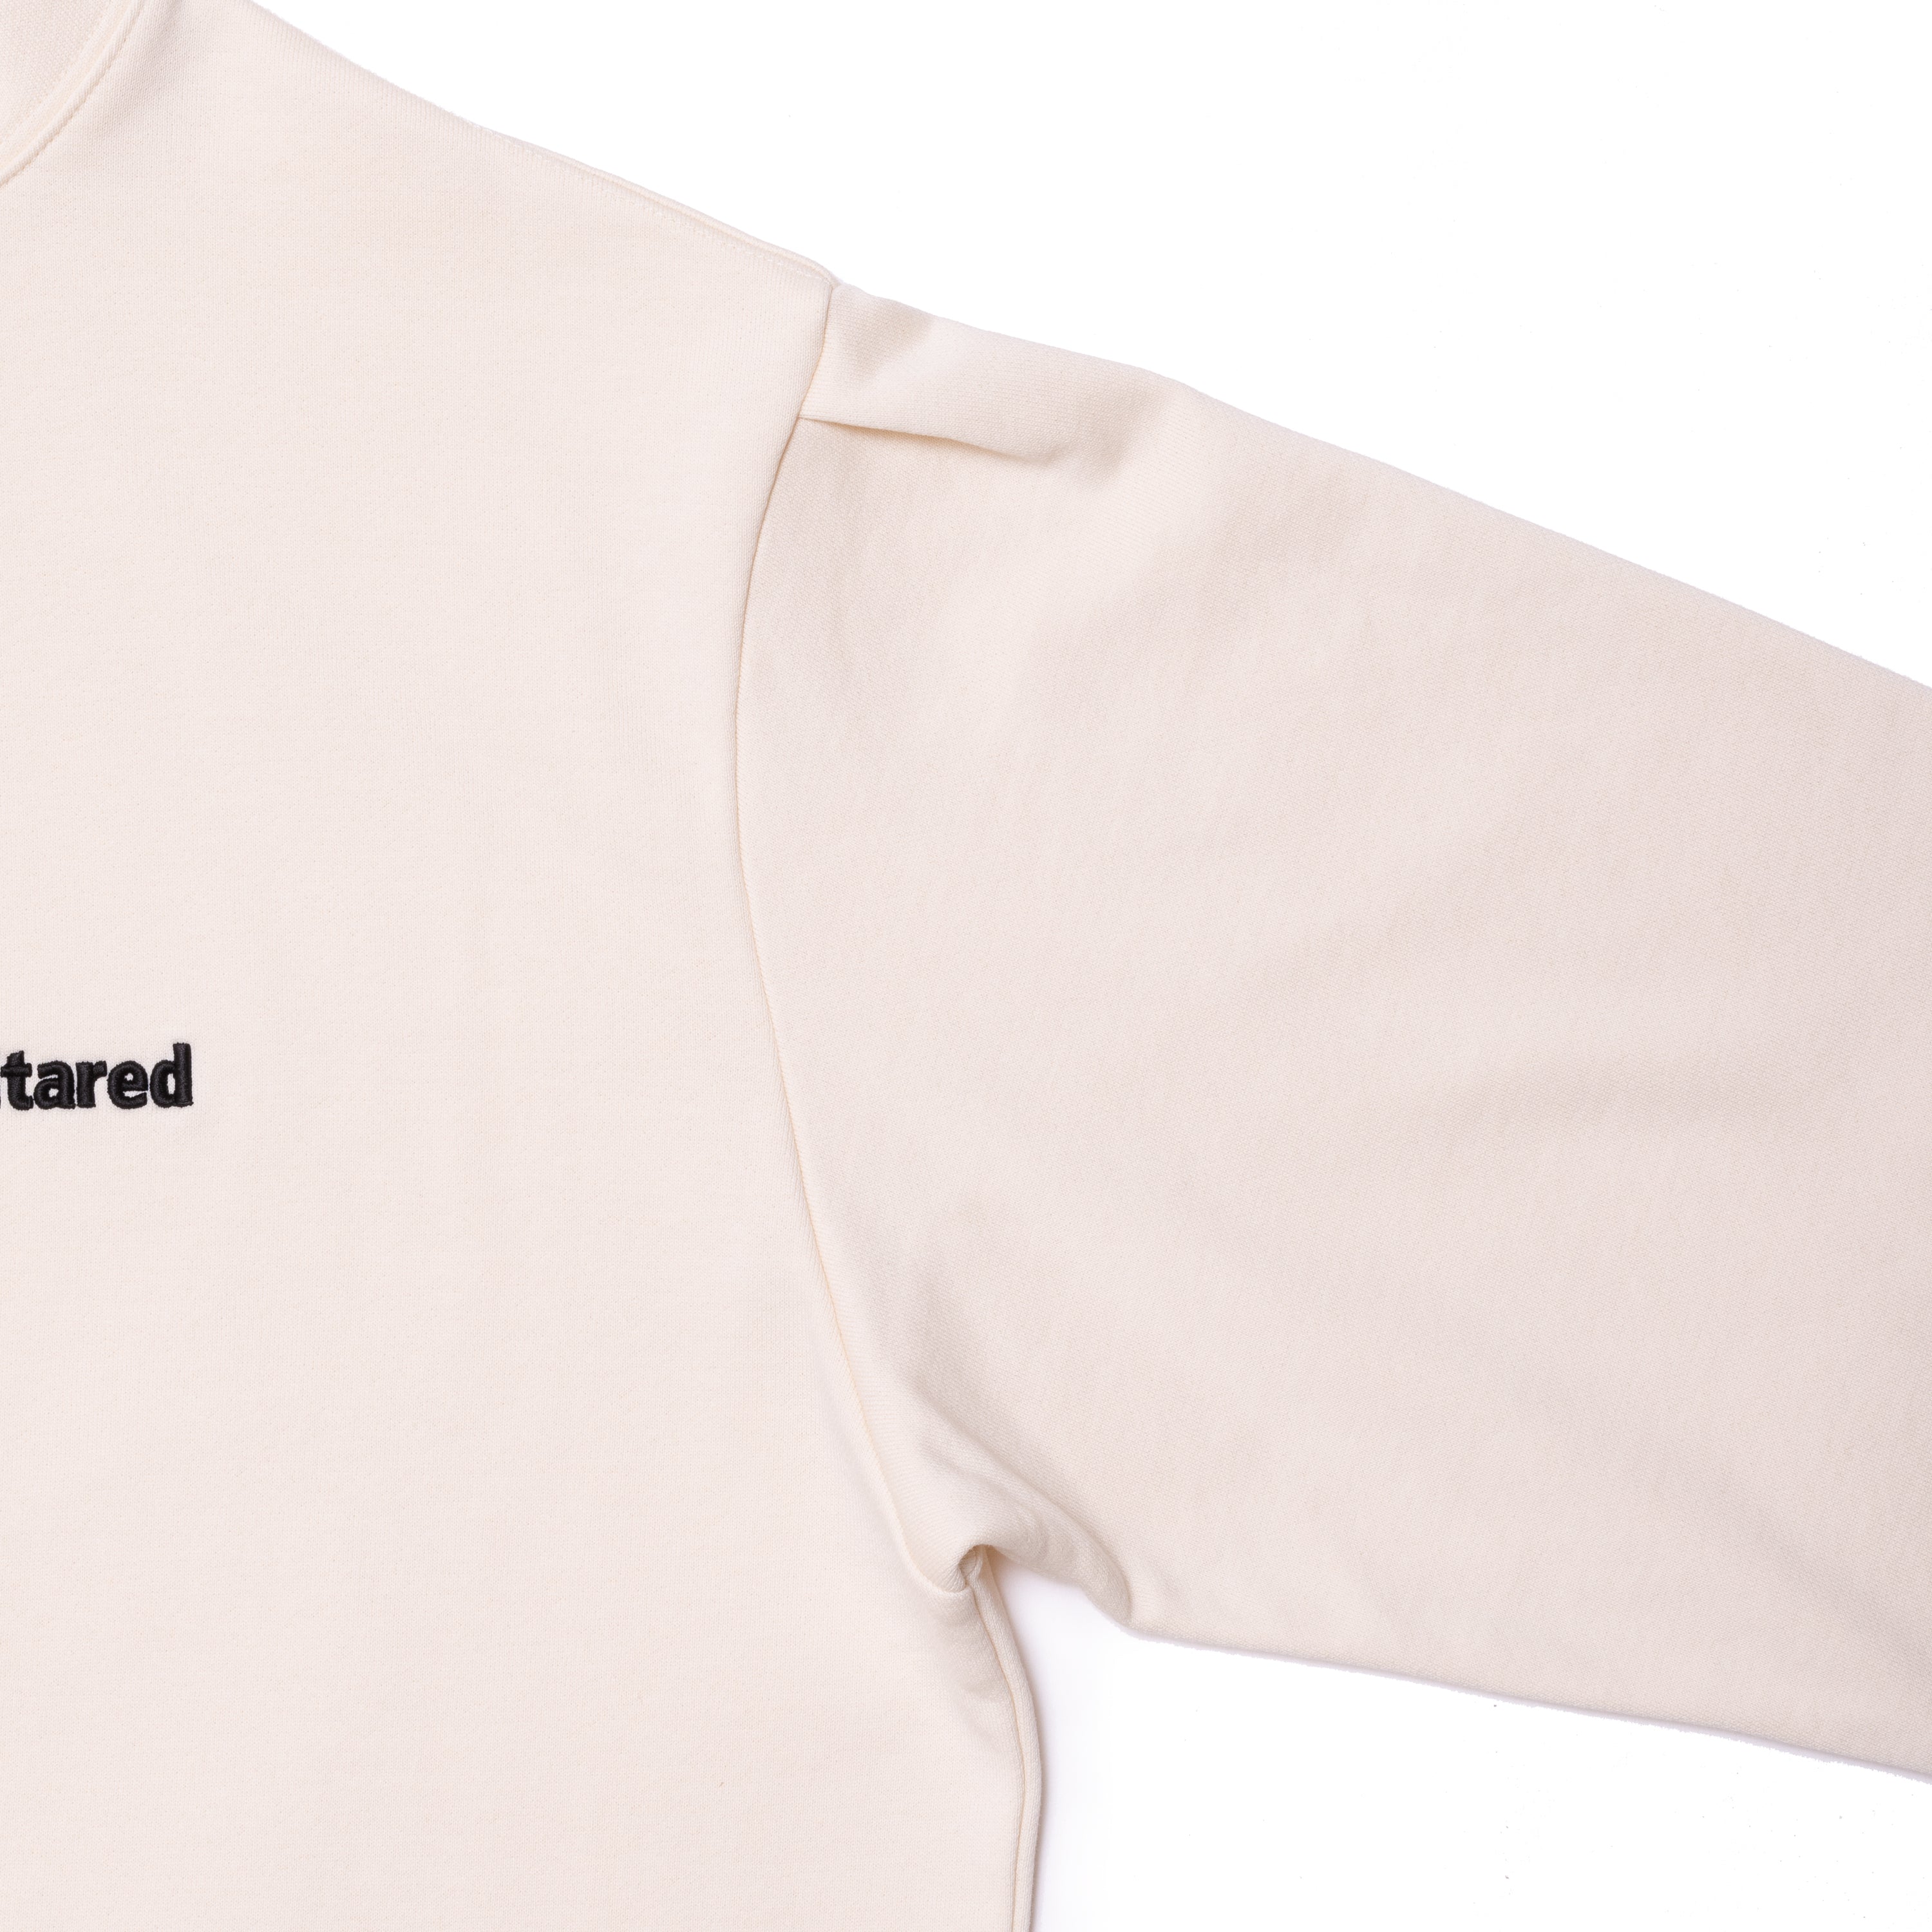 altared/Logo 3D Embroidery Hooded Sweat Shirt[IVORY]